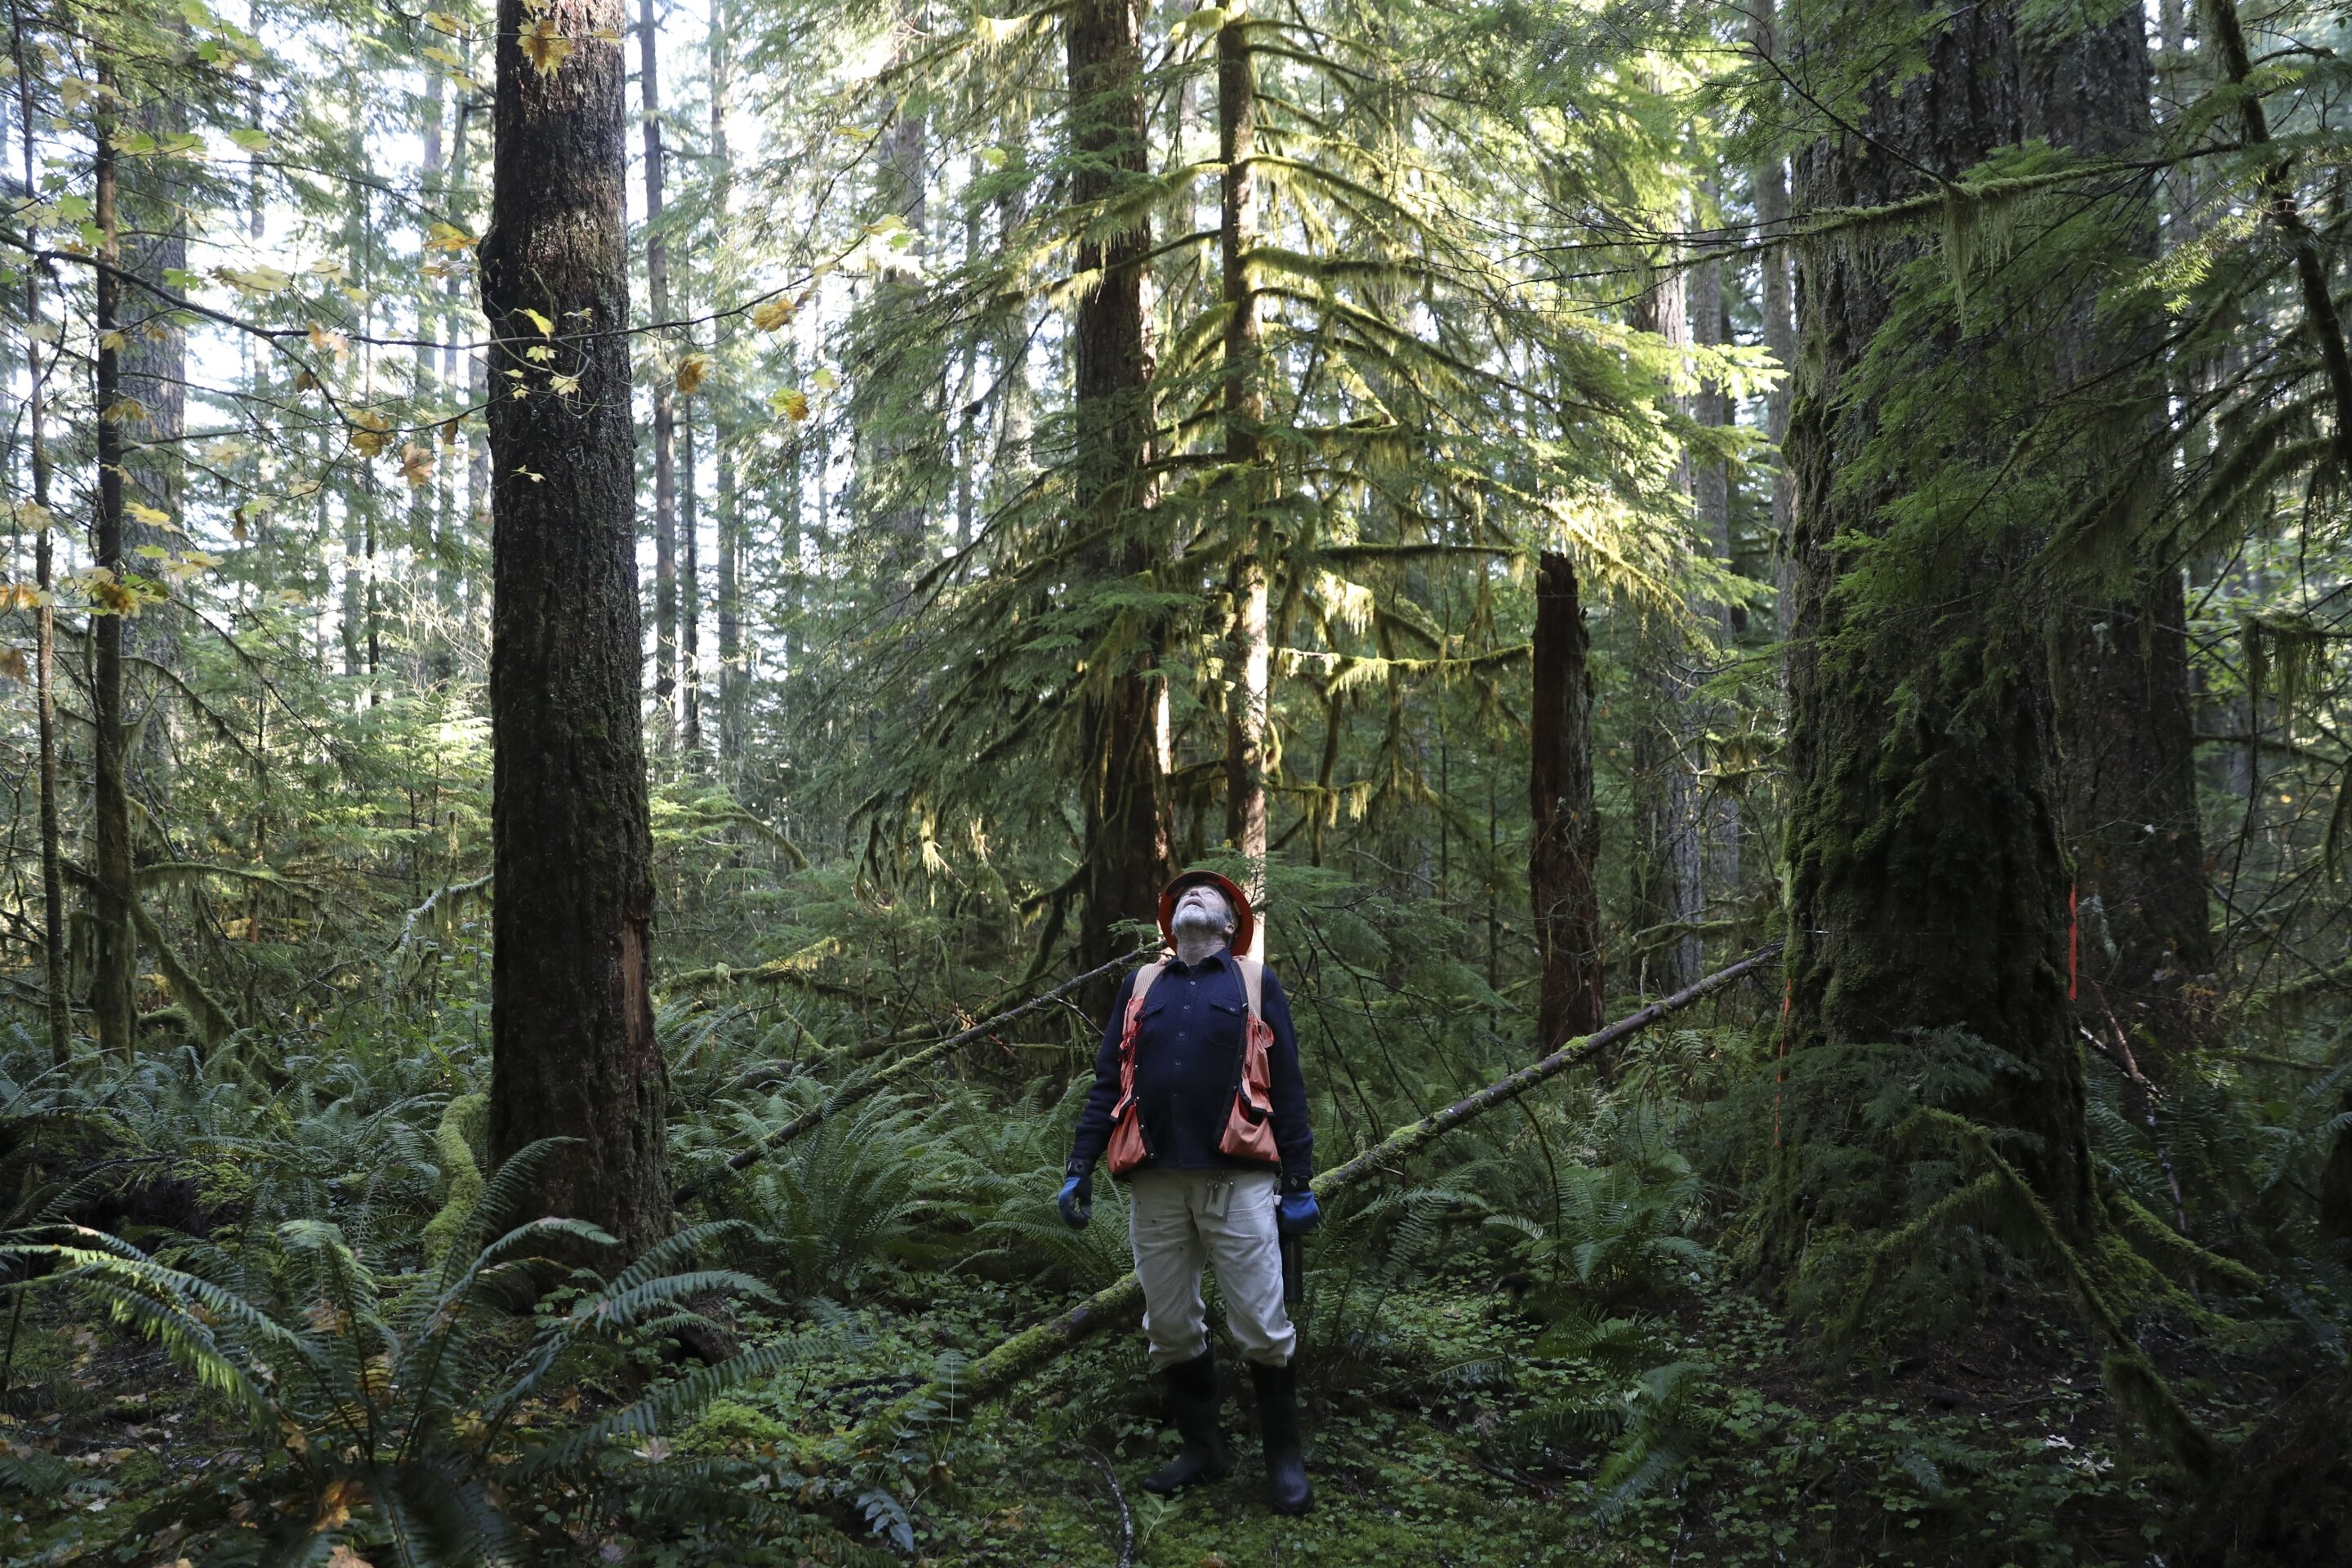 Extreme heat represents a new threat to trees and plants in the Pacific Northwest